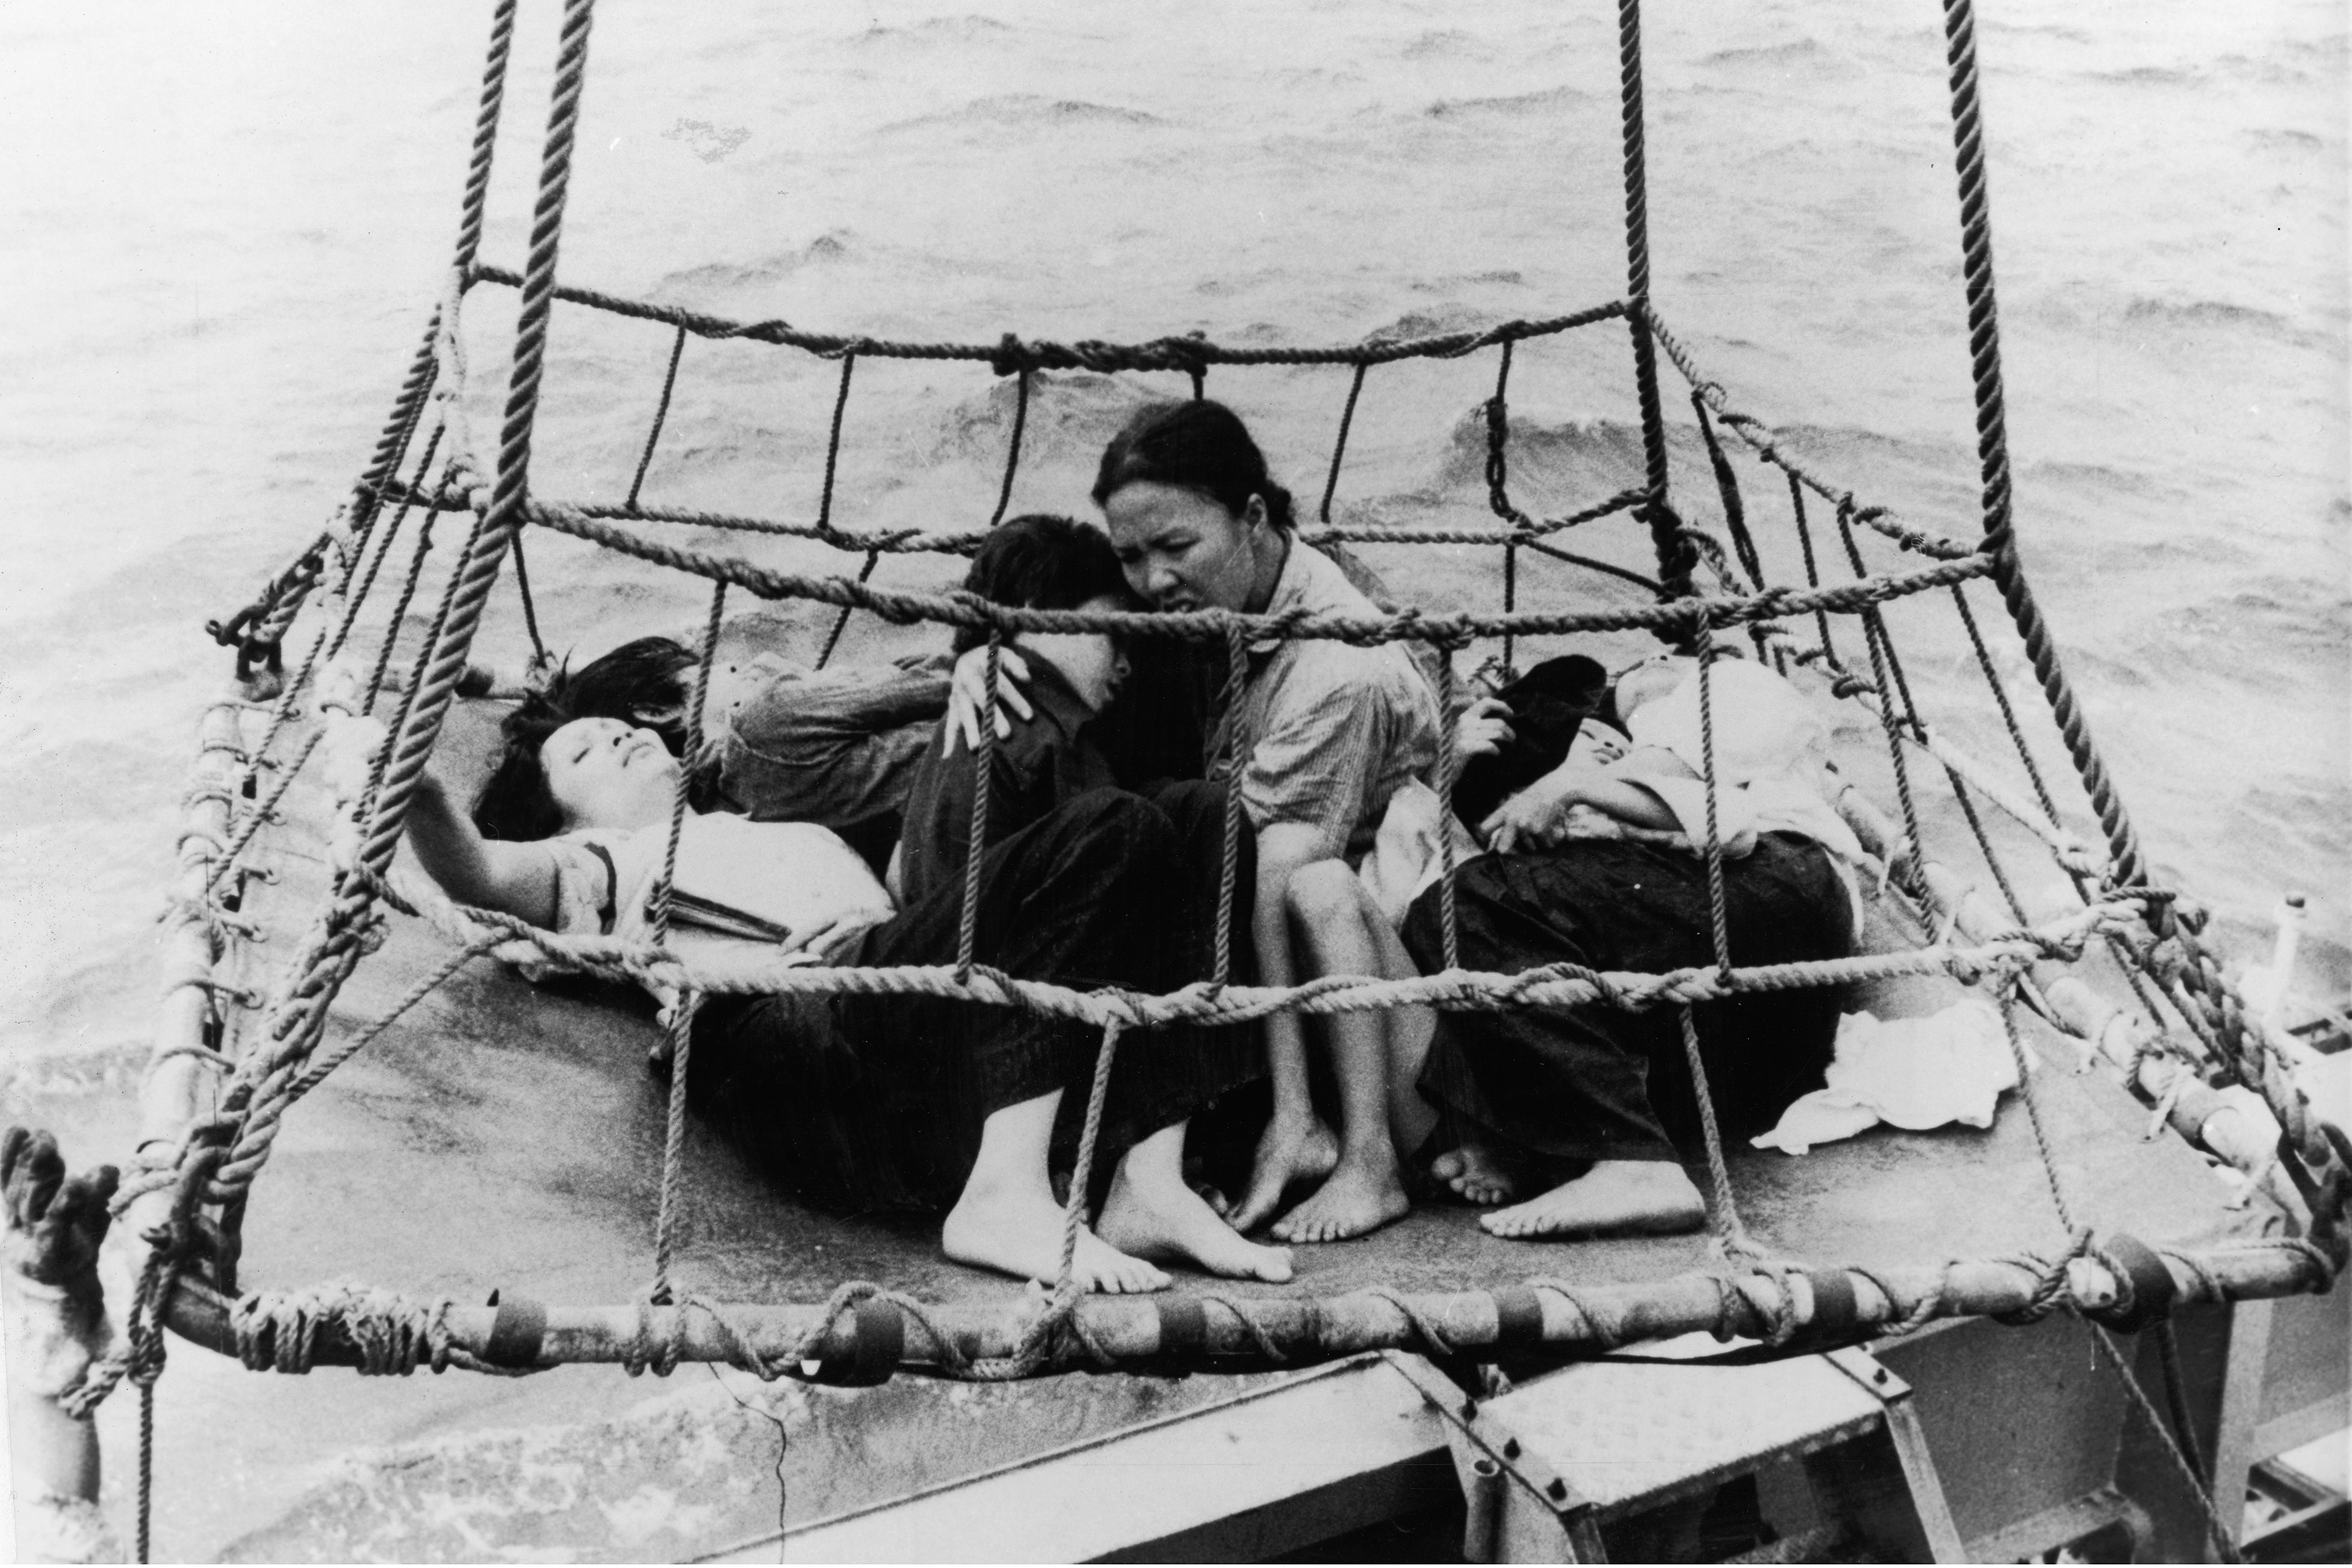 Vietnamese 'boat people' refugees huddle together on a tarp as they are airlifted out of the sea during the Vietnam War, 1960s. (Photo by Express Newspapers/Getty Images)